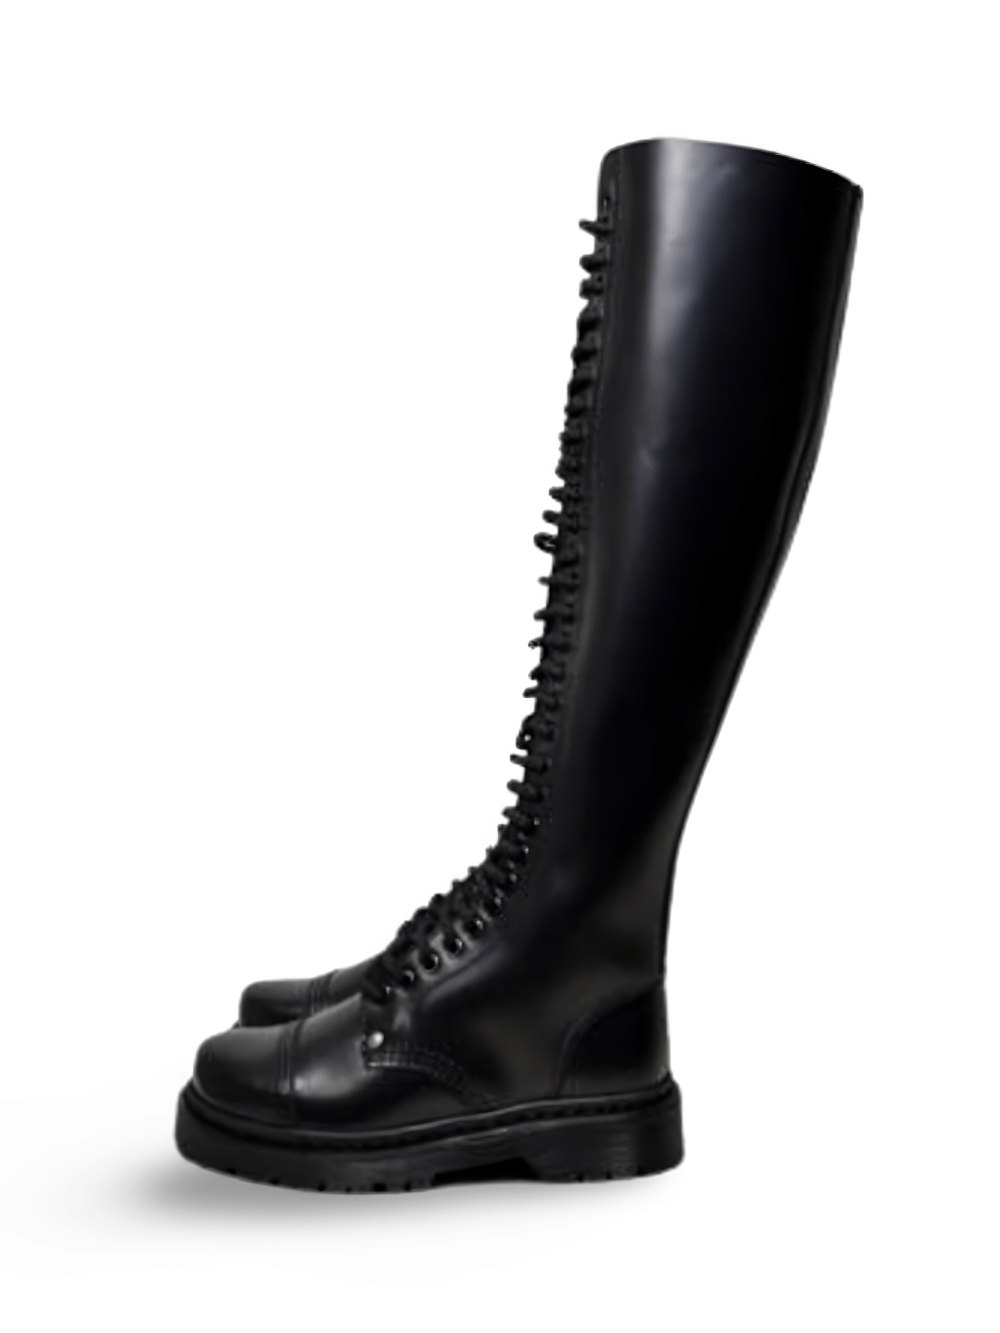 Gothic Style Black Unisex Knee High Boots in Box Leather